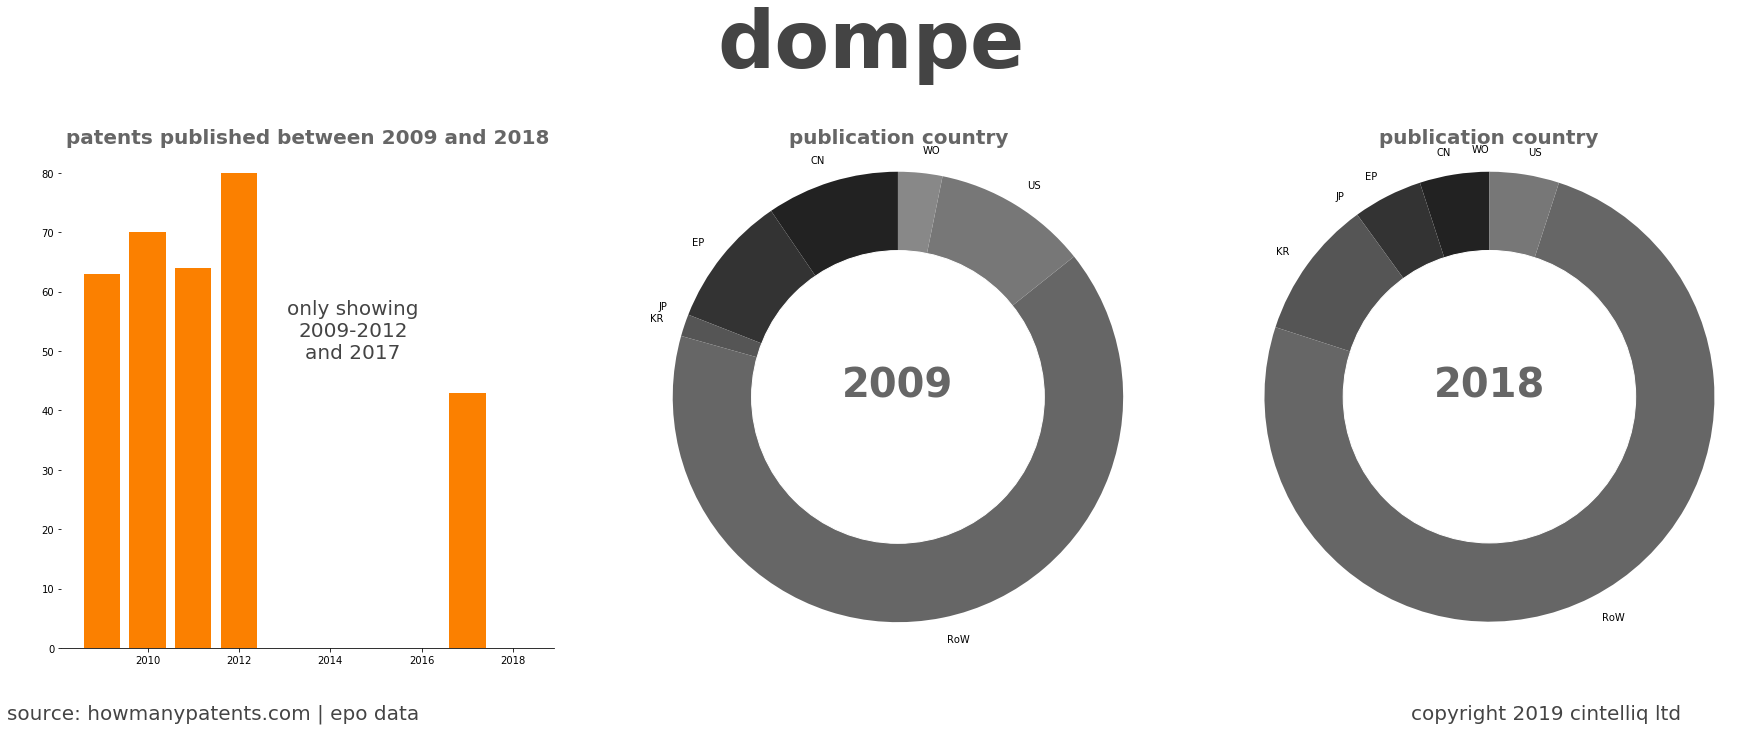 summary of patents for Dompe